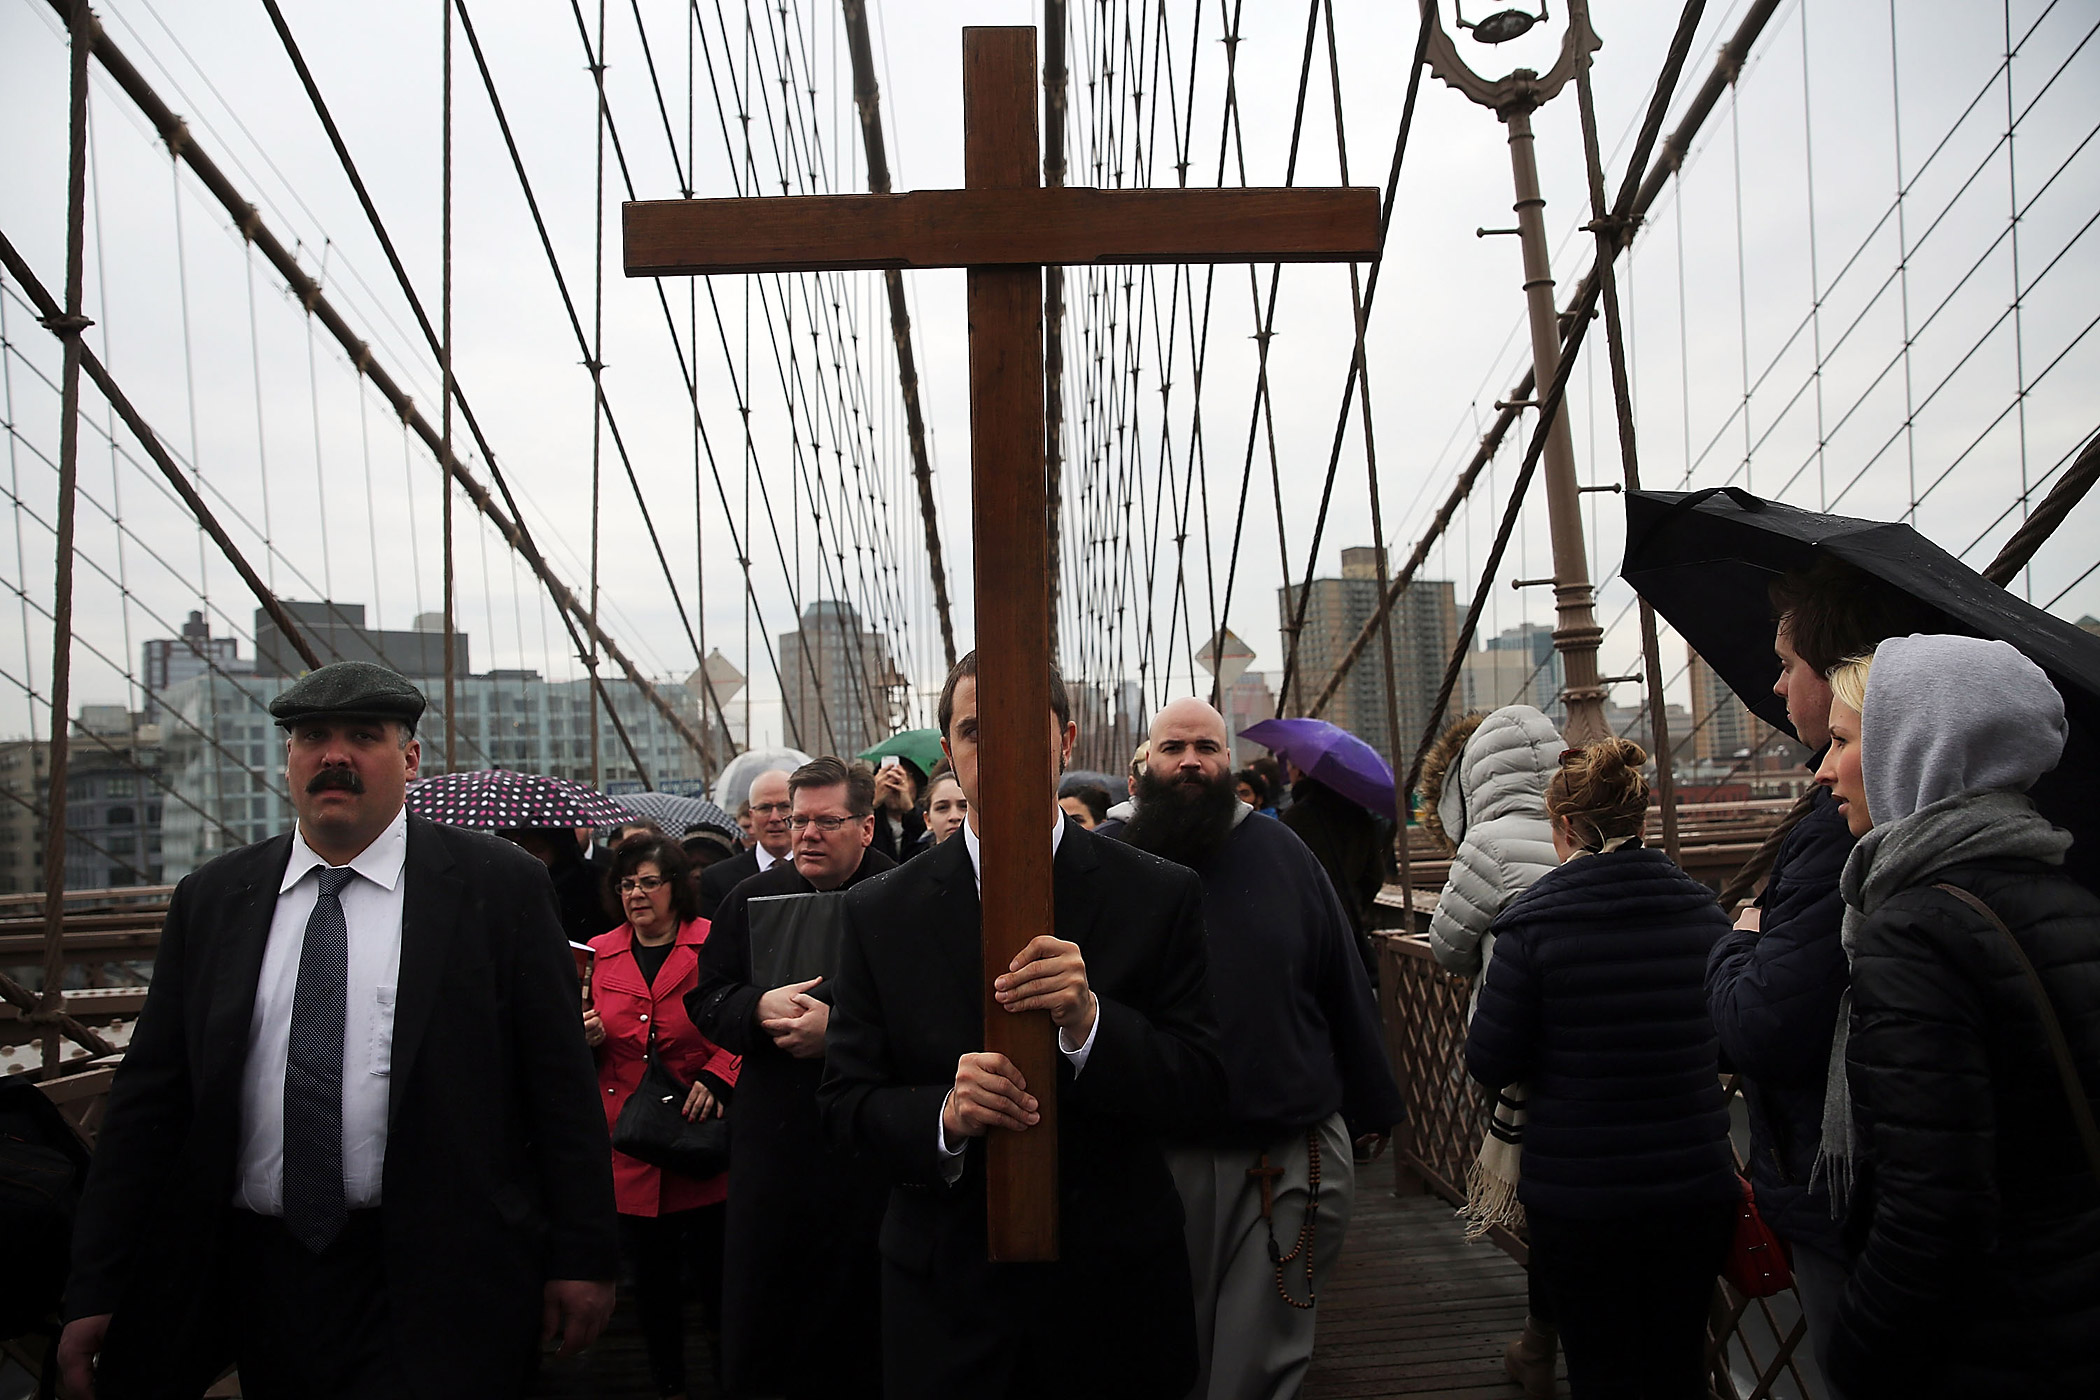 Members of the Archdiocese of New York and the Diocese of Brooklyn lead the Way of the Cross procession over the Brooklyn Bridge on April 3, 2015 in New York City. (Spencer Platt—Getty Images)